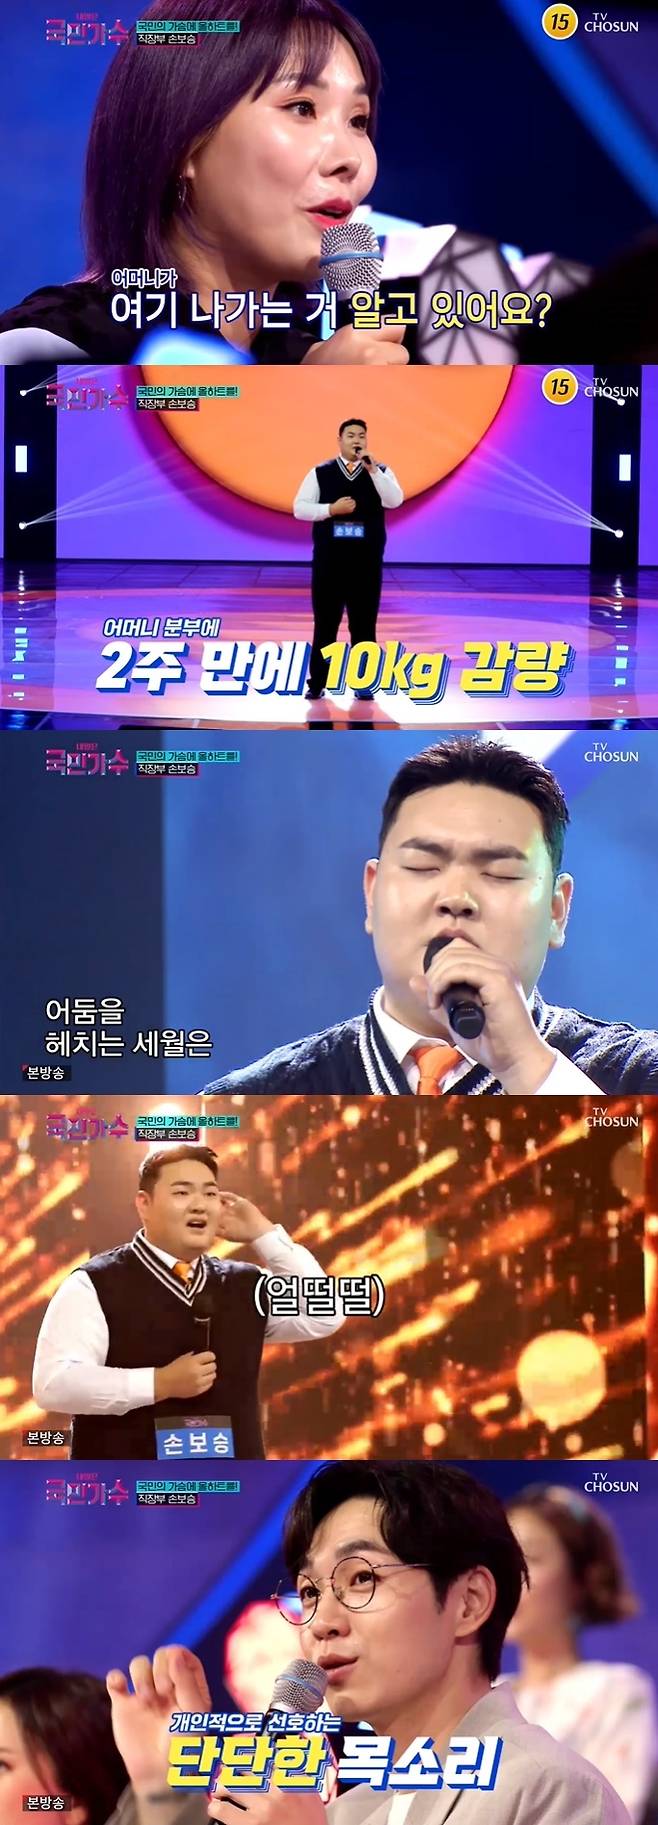 Son Bo-seung challenged National singer tomorrow after dieting on the advice of mother Kyeong-shil Lee.In the TV Chosun Tomorrow is a National singer, which was broadcast on October 14, actor Son Bo-seung appeared as a participant in the workplace and set the stage.I want to be a supporting actor in drama, but I want to be a leading actor on stage, said Seungeun, the son of six-year-old actor and comedian Kyeong-shil Lee.Shin Bong-sun, who recognized Son Bo-seung as the son of Kyeong-shil Lee, asked, Do you know that Kyeong-shil Lee is coming here?I was told to lose some weight to get out, so I lost 10kg in a hurry for two weeks, and no one knew, said Seungeun.Boom said, I think Im losing weight than the penthouse, but he said, Its better than that, and he was furious about it.He received All Hearts for his Reversal Story singing voice as a To You Know My Pain. After the stage, Lee Seok-hoon said, I kept doubting.I suspected that my ears were right, which I thought were doing well and good, but I personally like the sound of the wick remaining even if I go to high and low sounds.